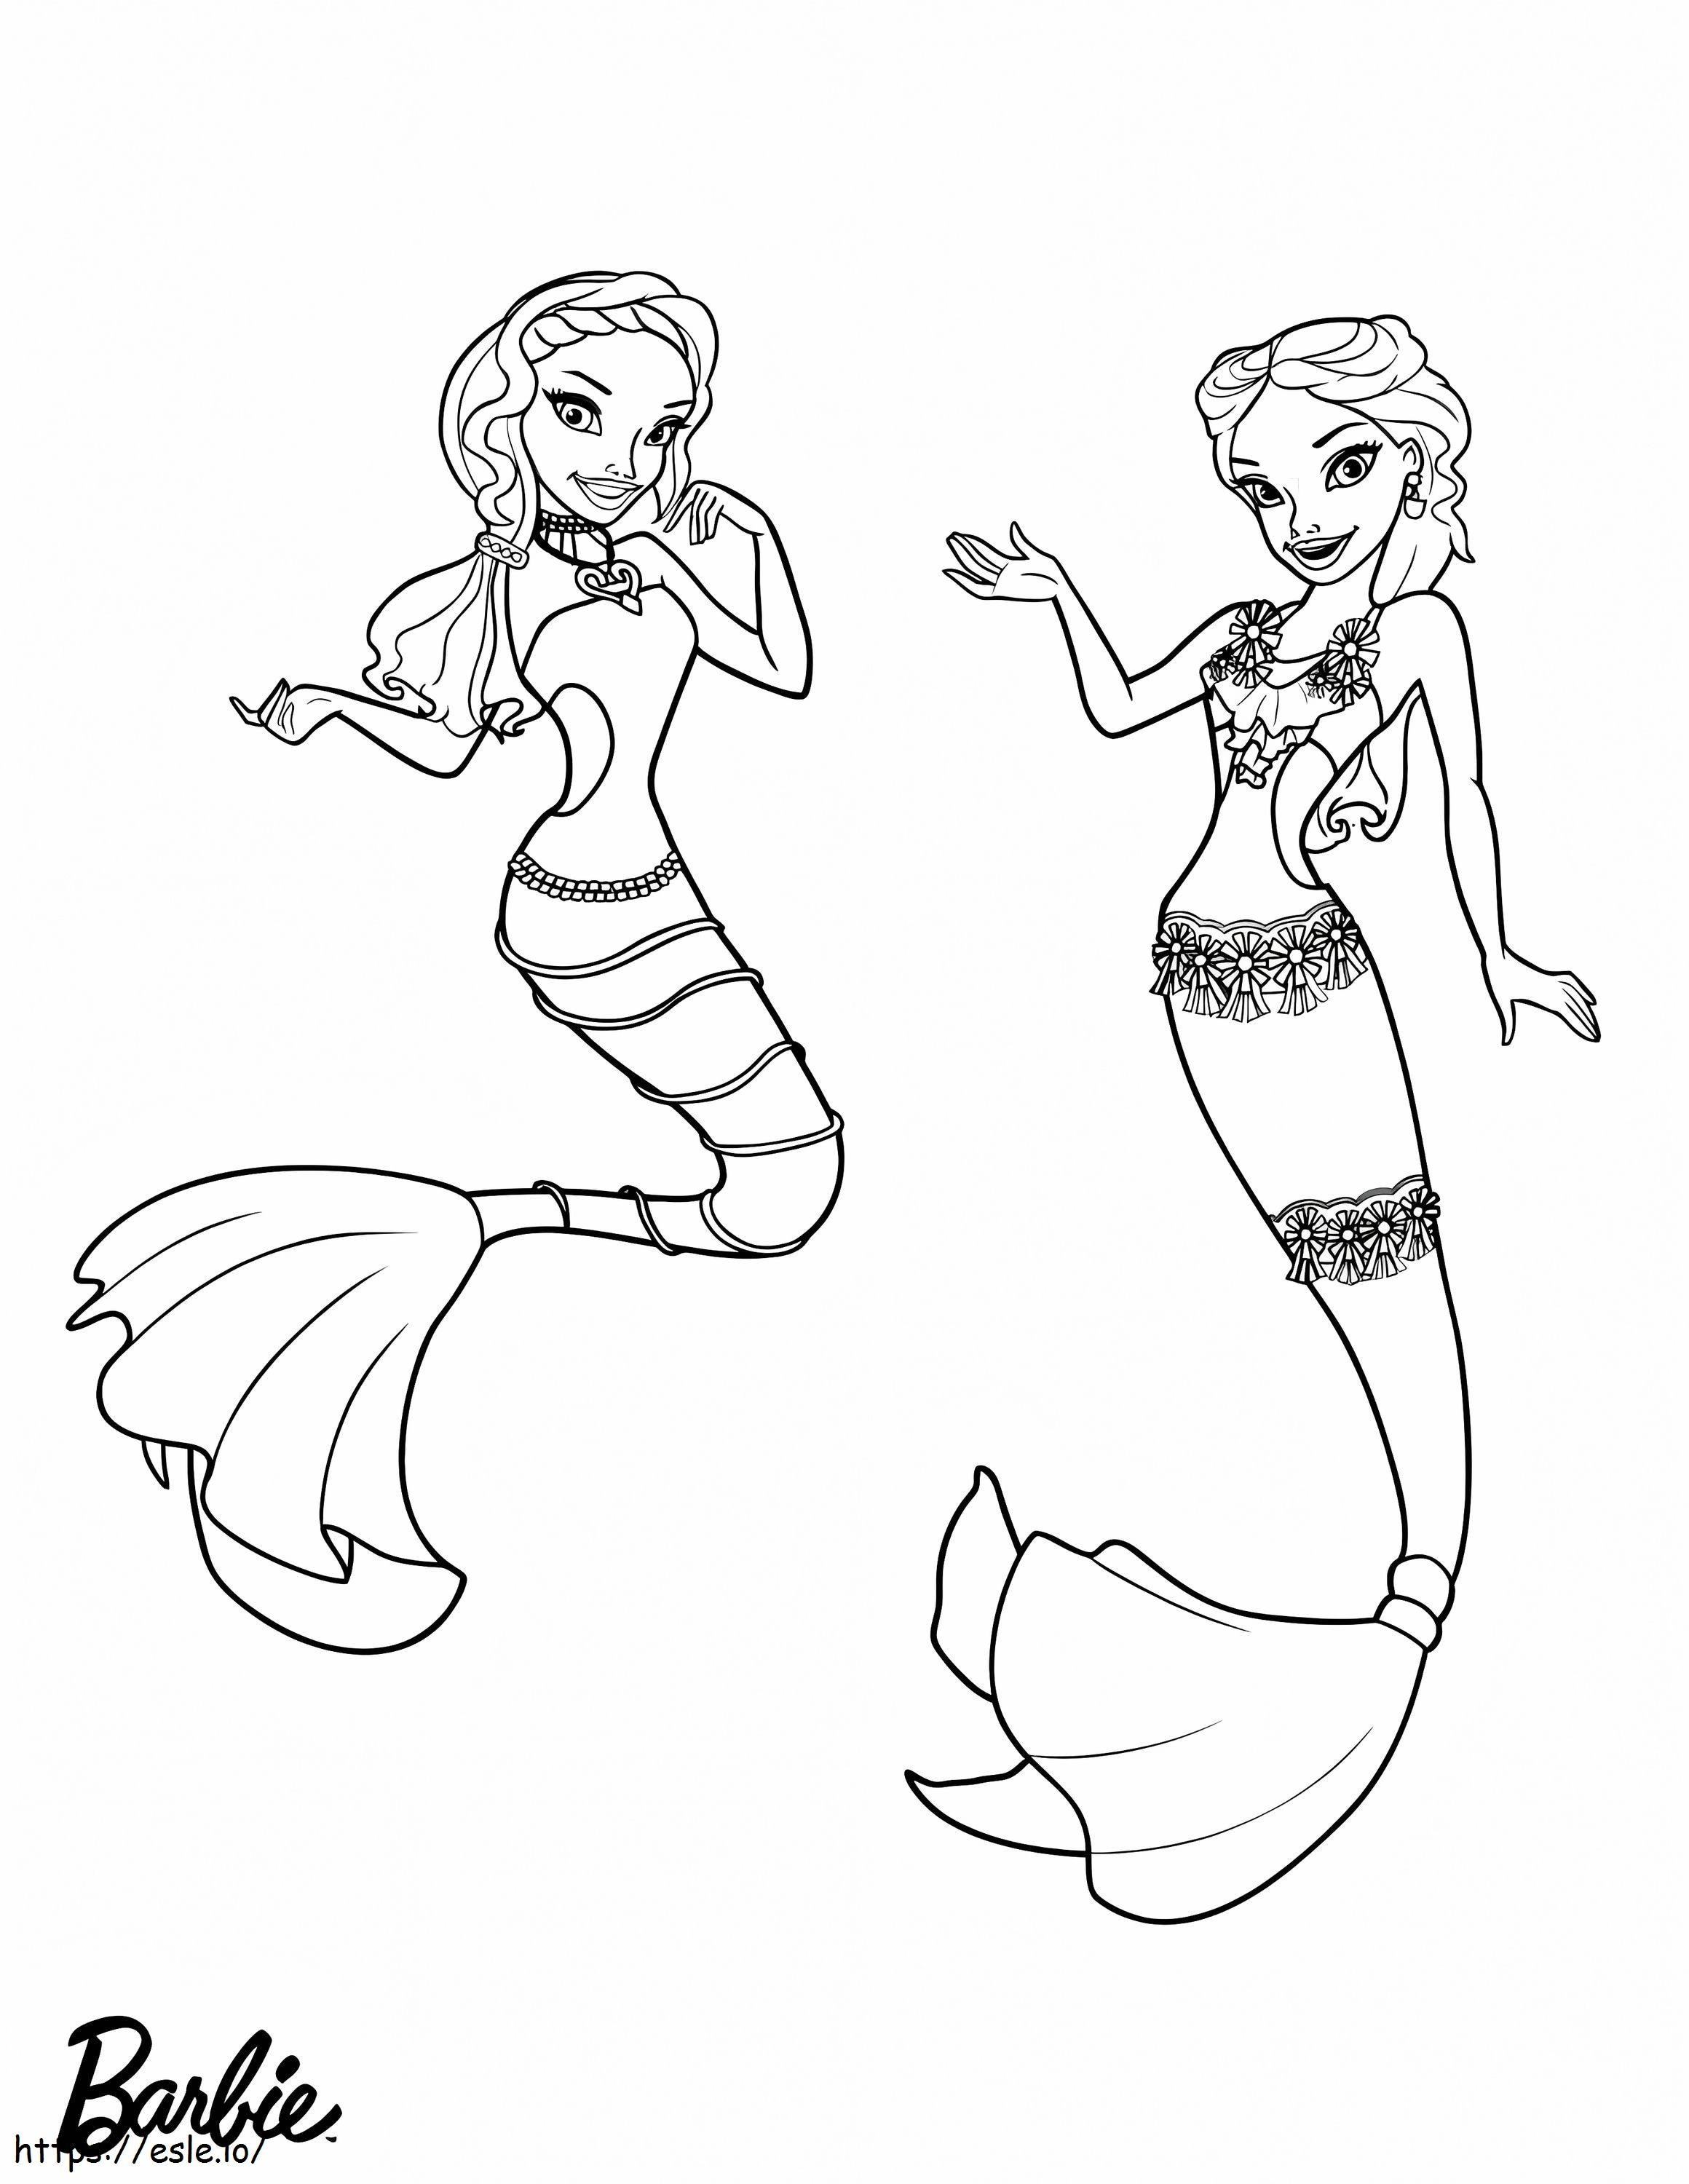 Barbie Mermaid And Friend coloring page